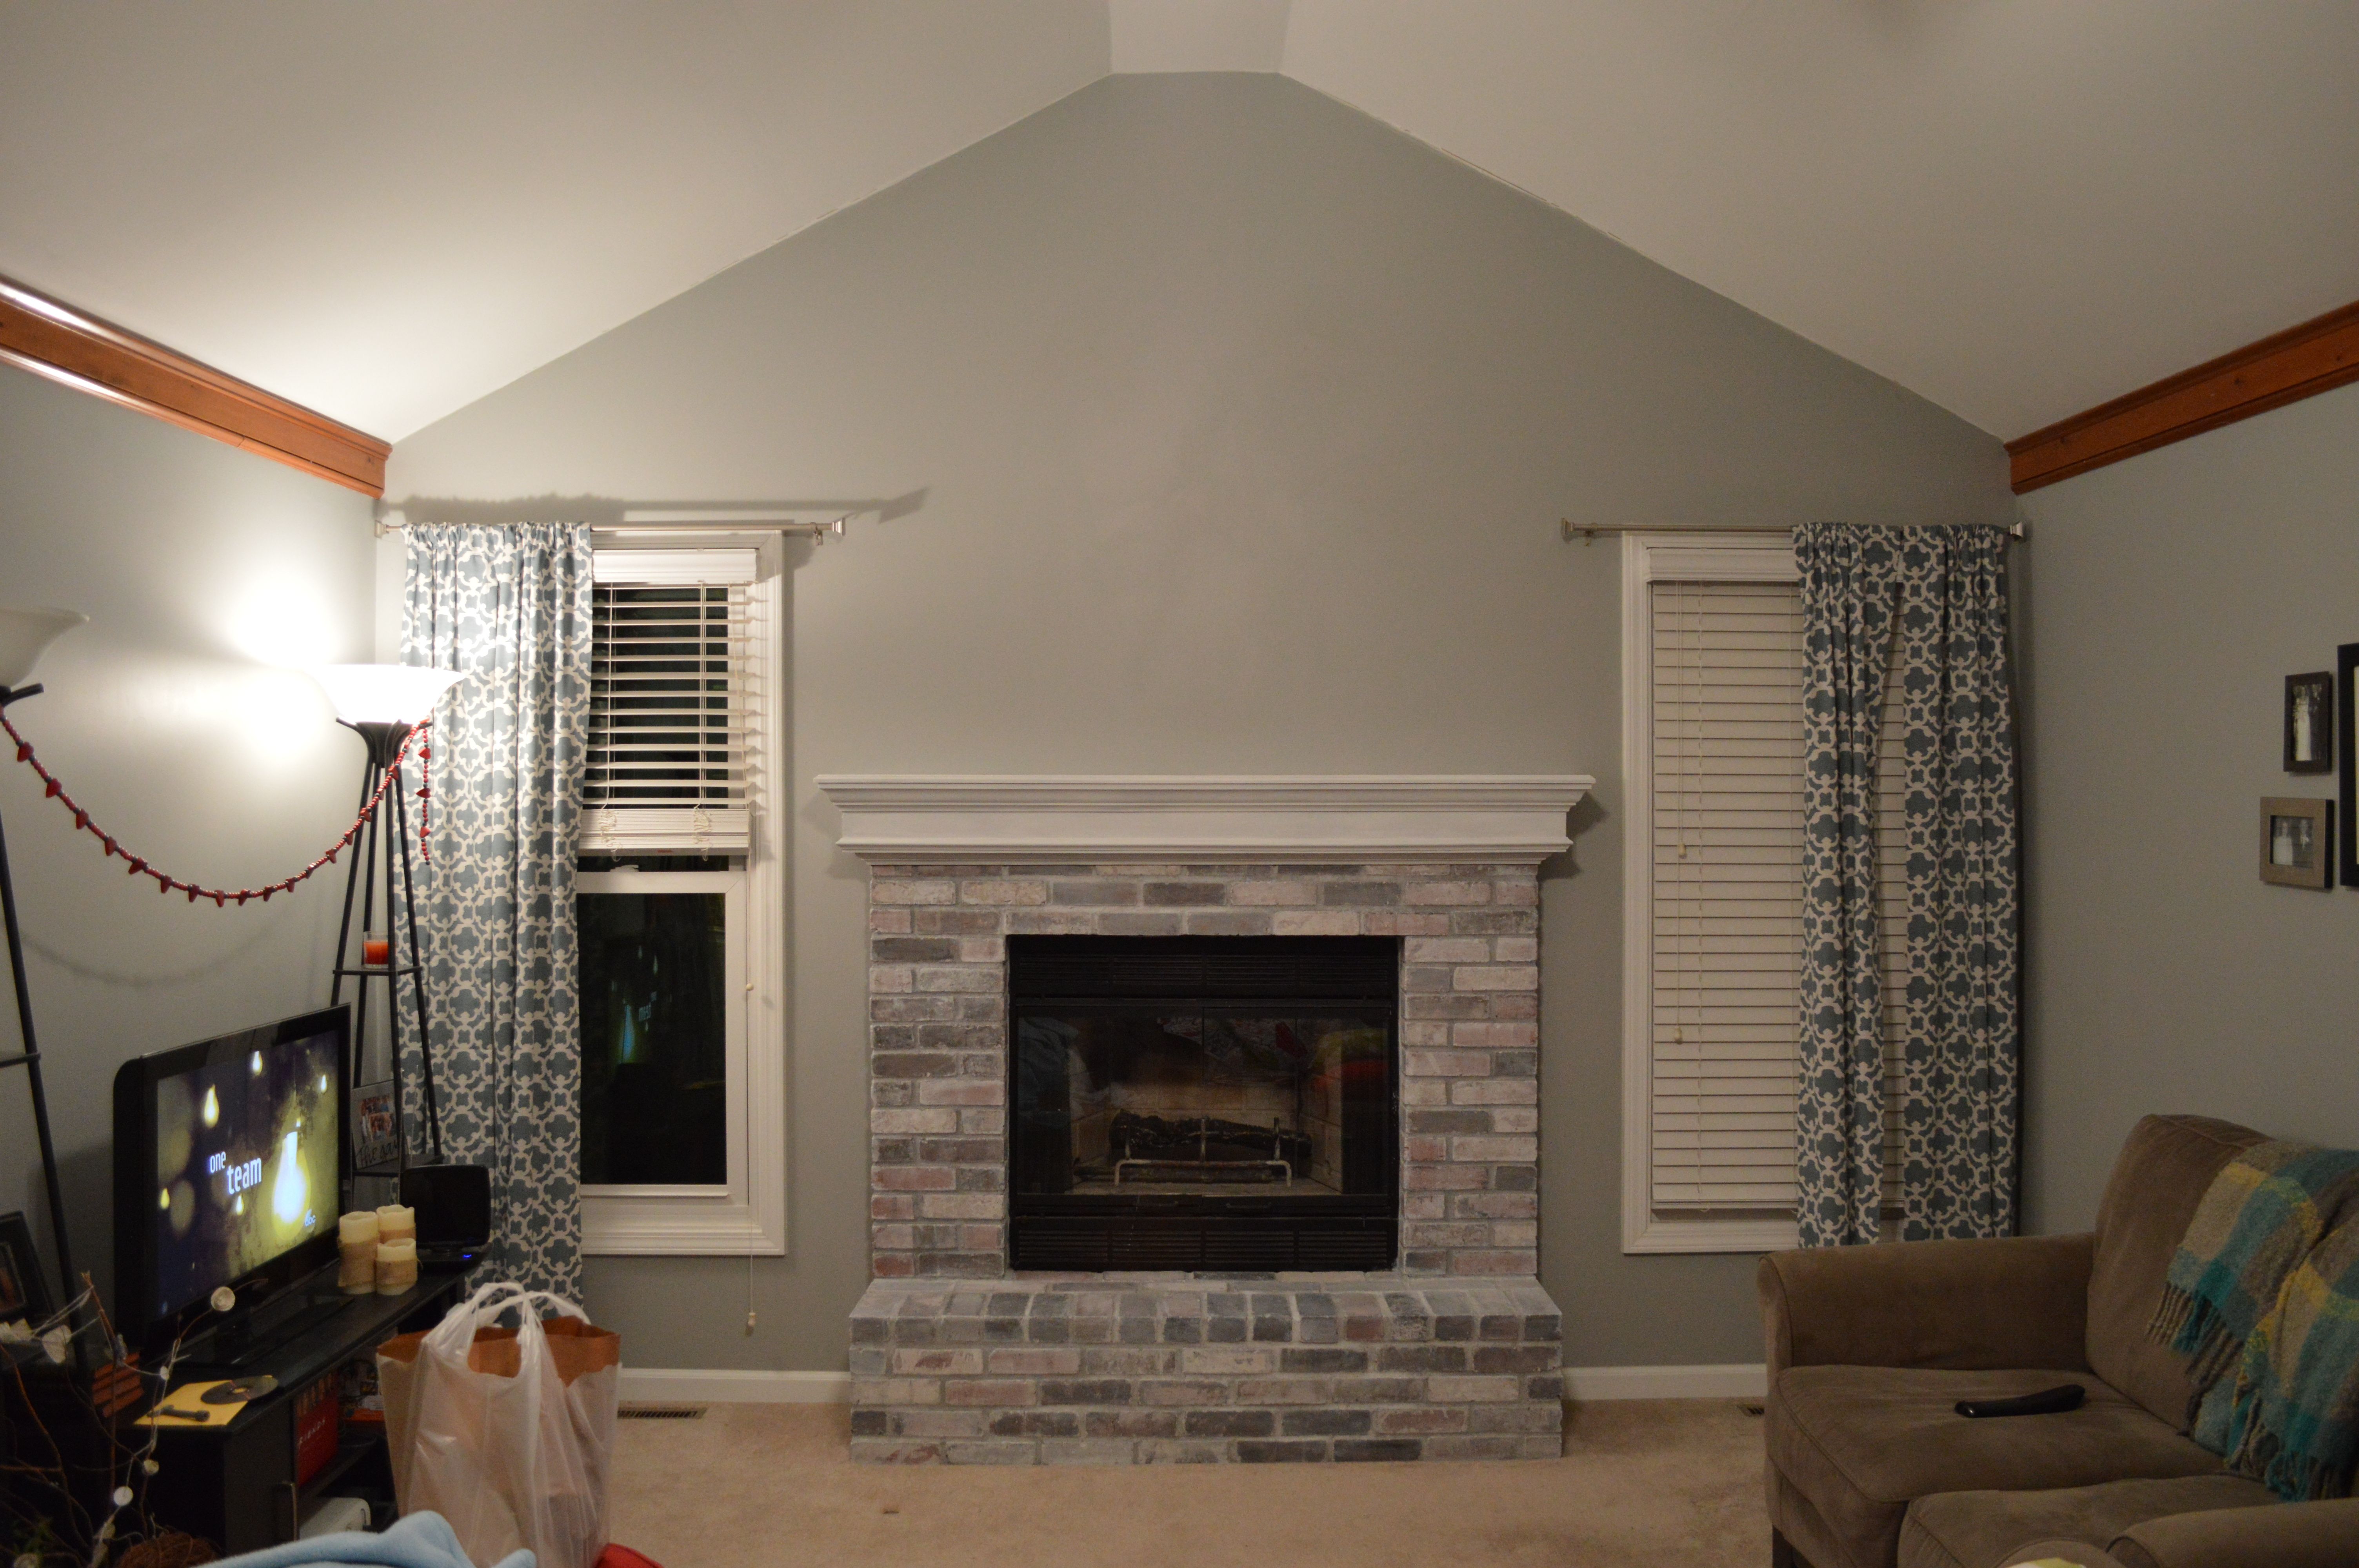 Renovate Brick Fireplace Beautiful How to Whitewash Brick Our Fireplace Makeover Loving